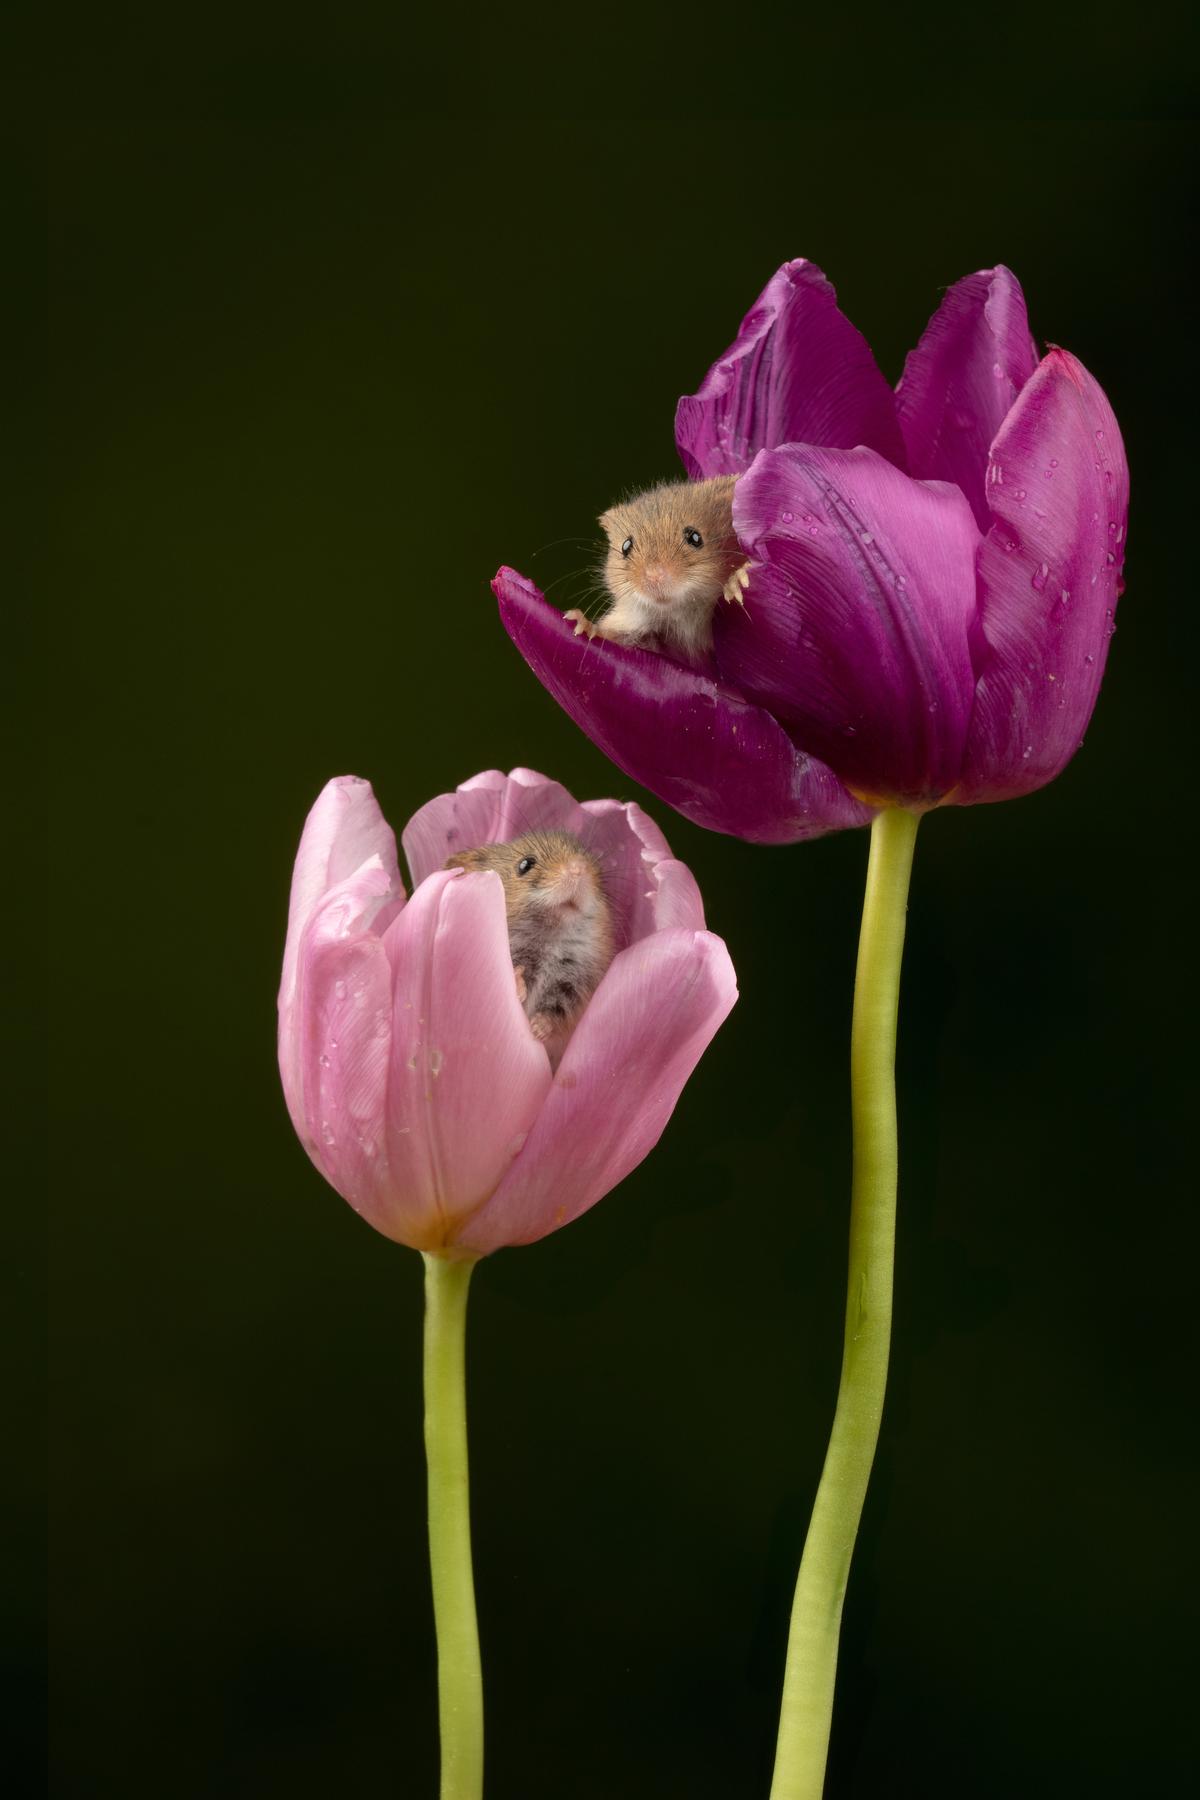 These harvest mice hiding in tulips by photographer Miles Herbert in spring 2019. (Caters News)